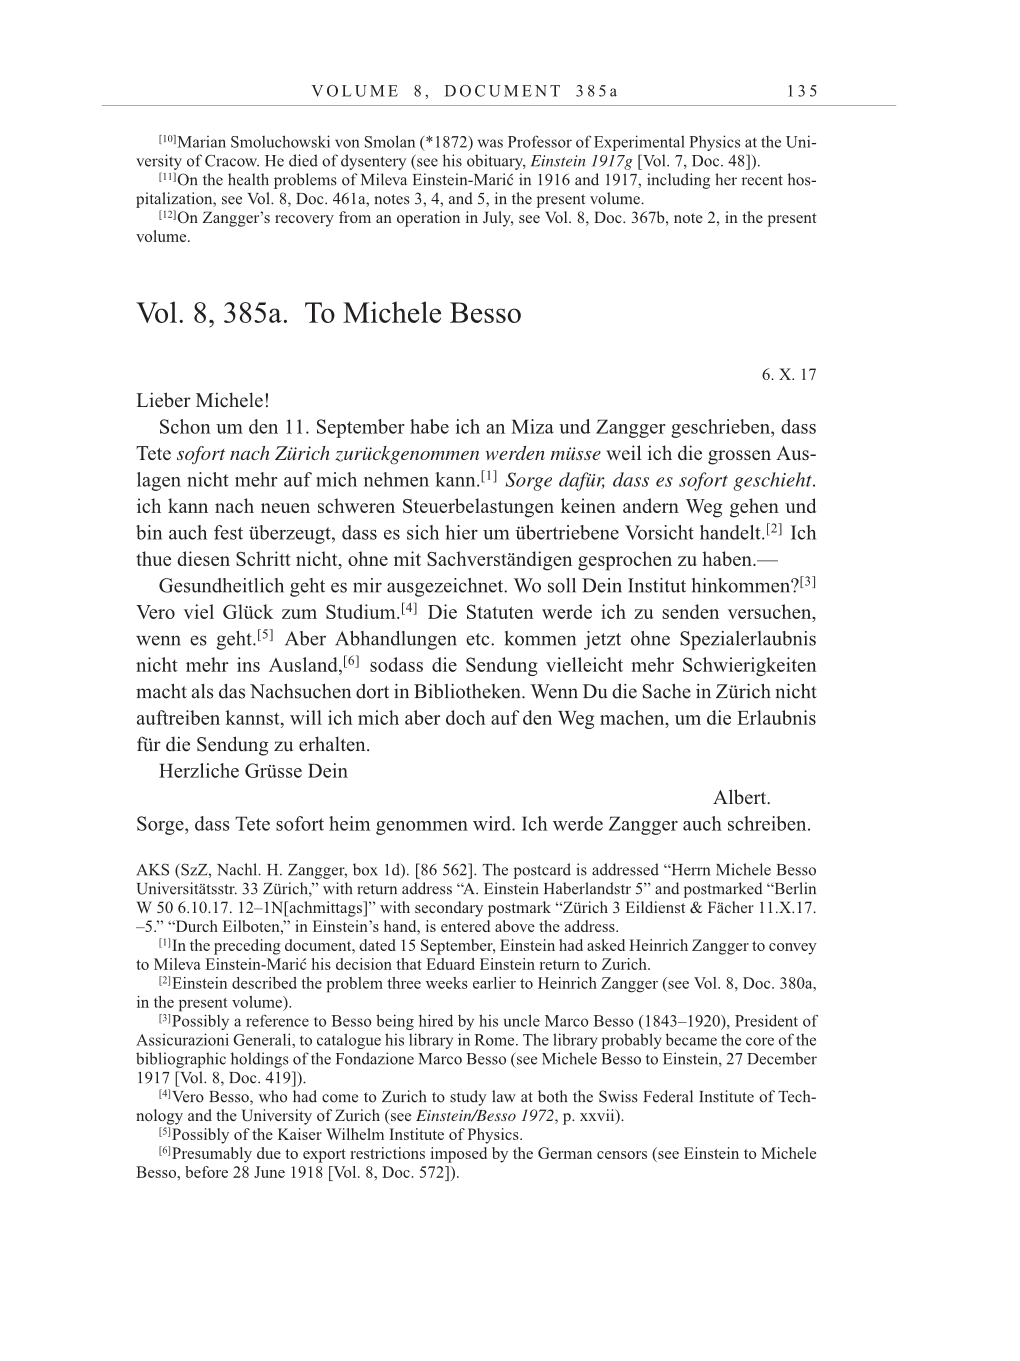 Volume 10: The Berlin Years: Correspondence May-December 1920 / Supplementary Correspondence 1909-1920 page 135